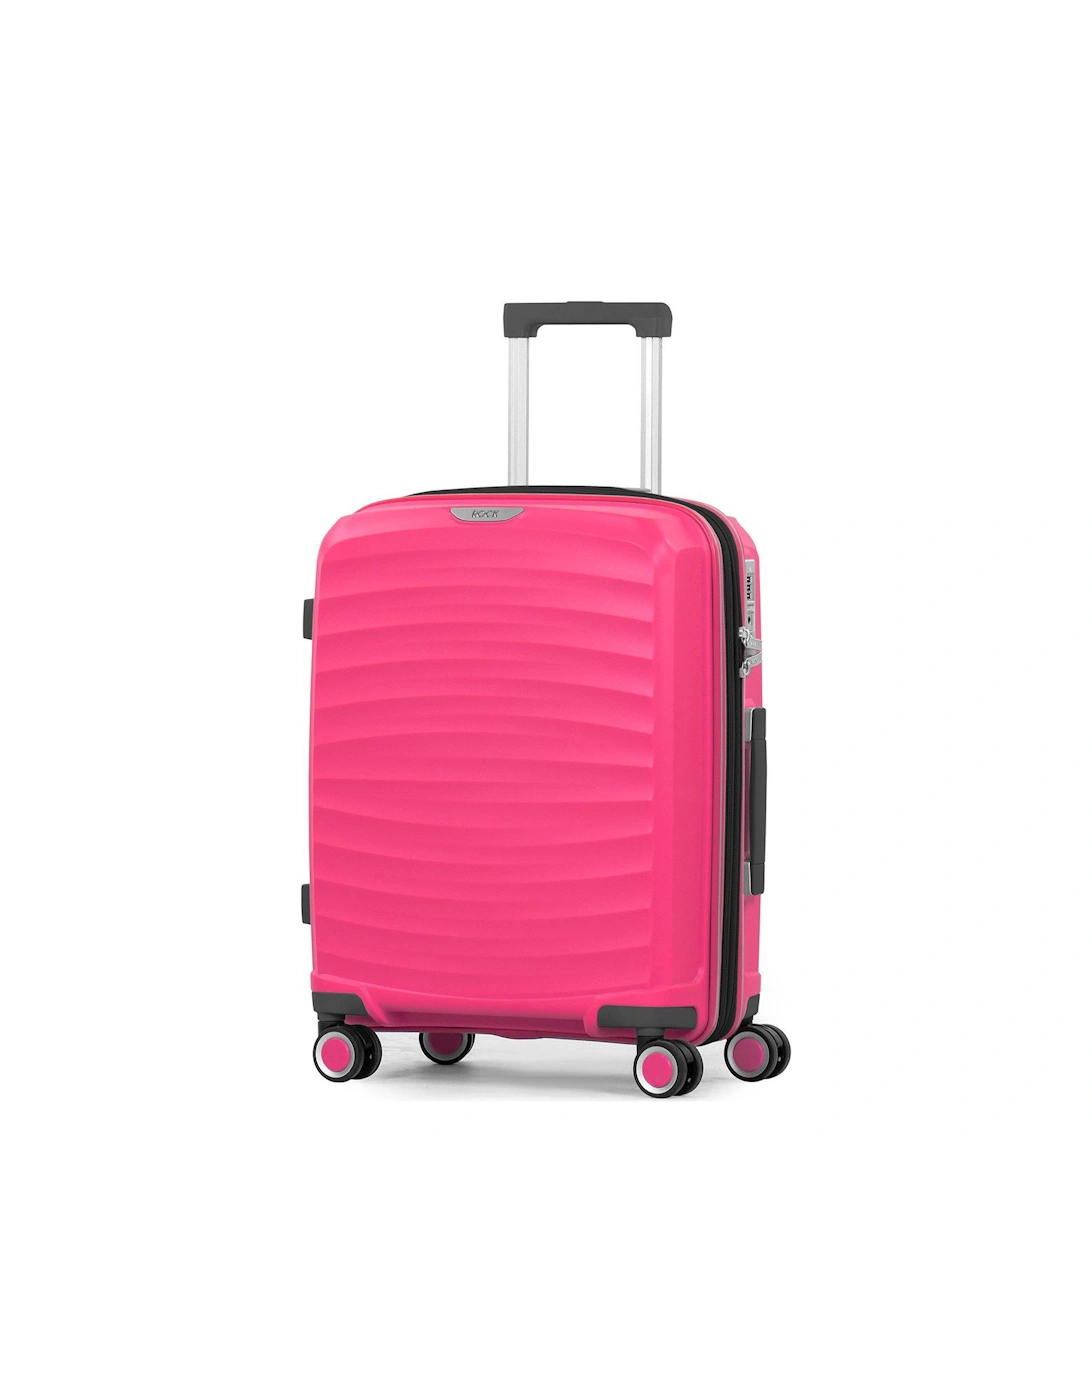 Sunwave Carry-on 8-Wheel Suitcase - Pink, 2 of 1